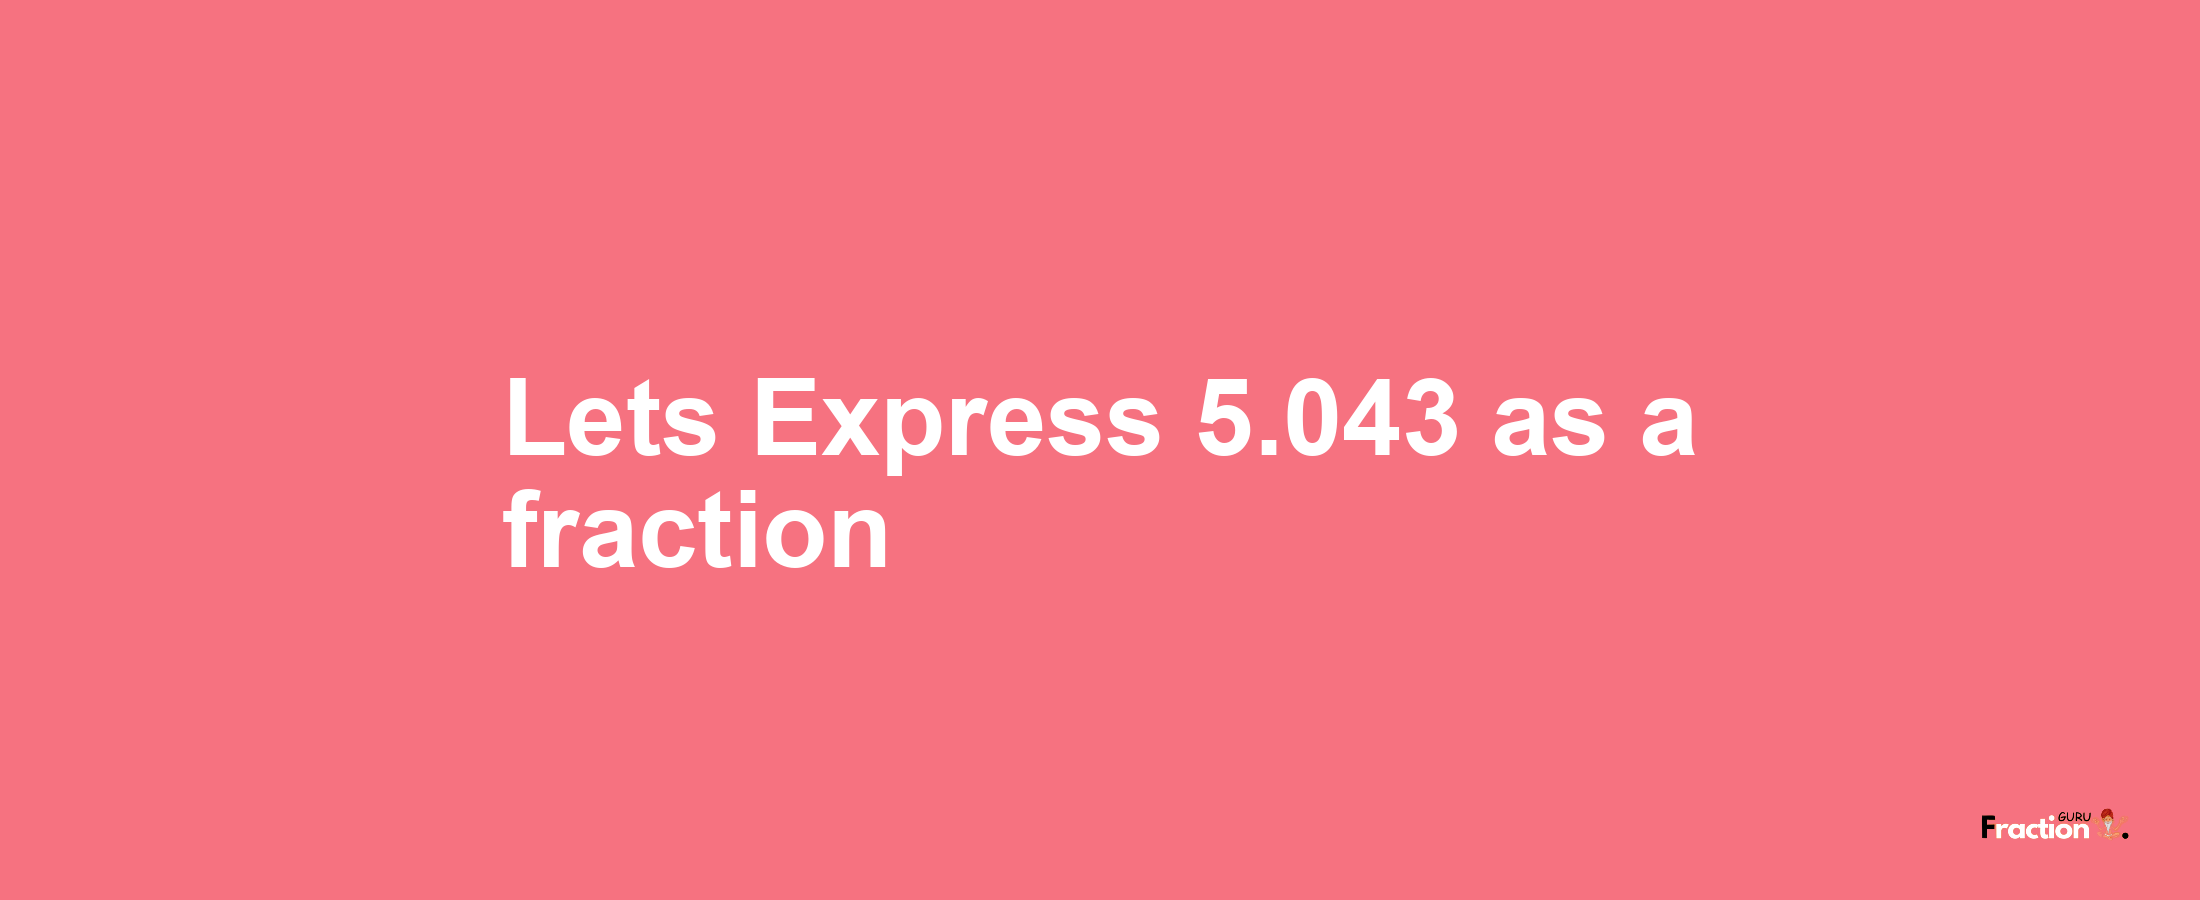 Lets Express 5.043 as afraction